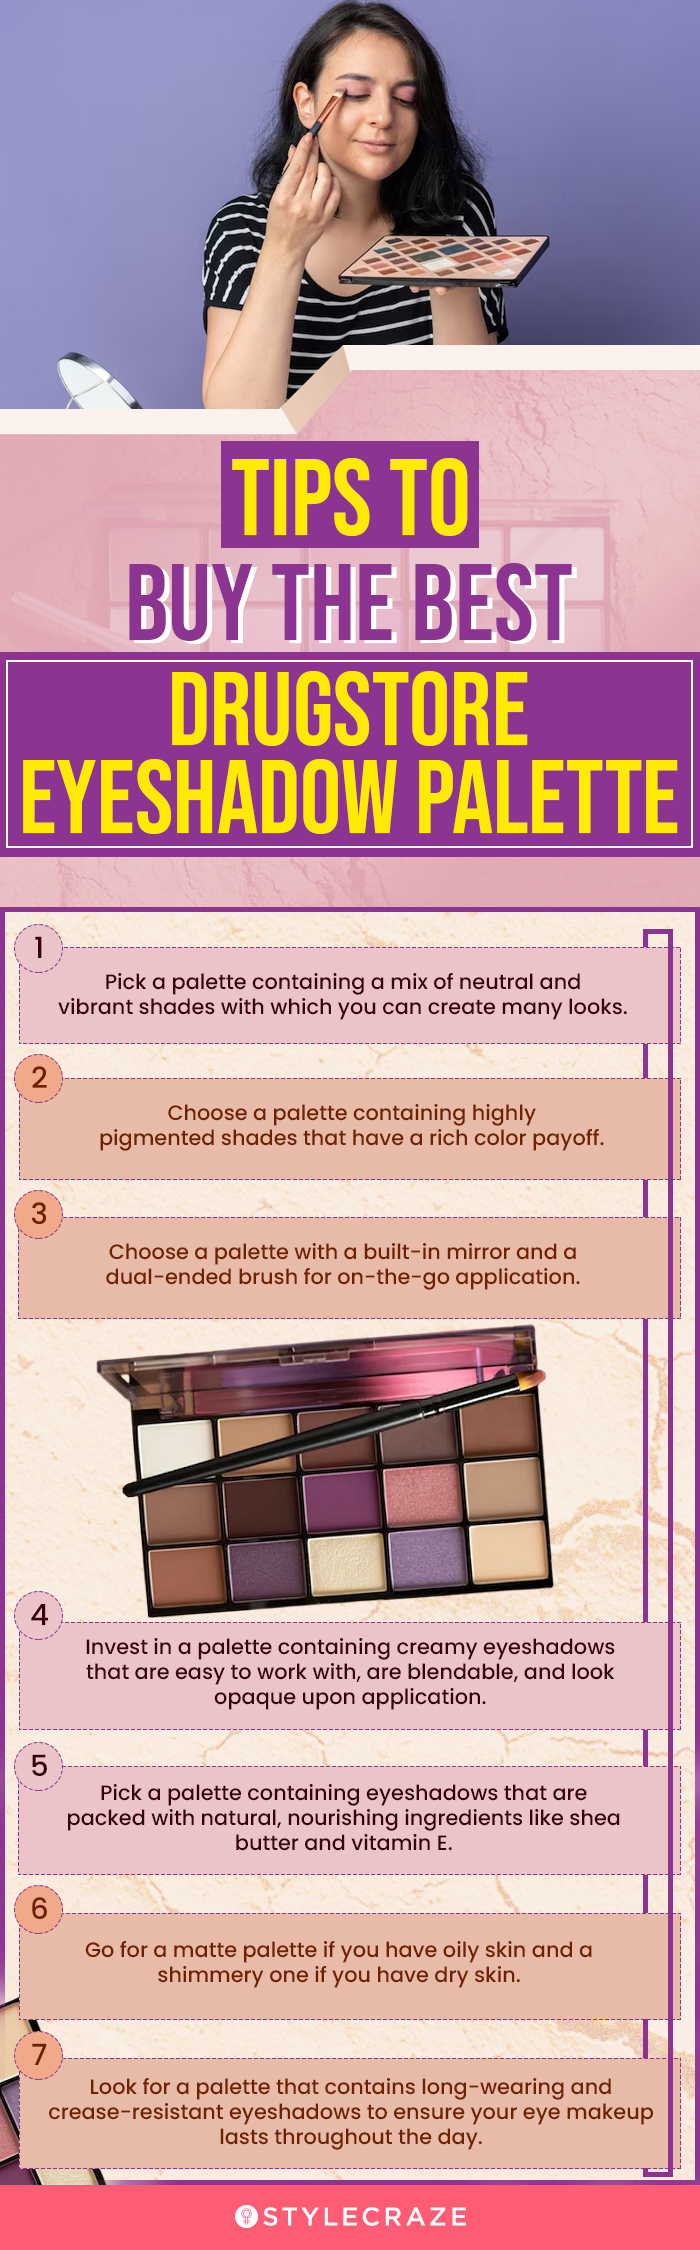 Tips To Buy The Best Drugstore Eyeshadow Palette (infographic)